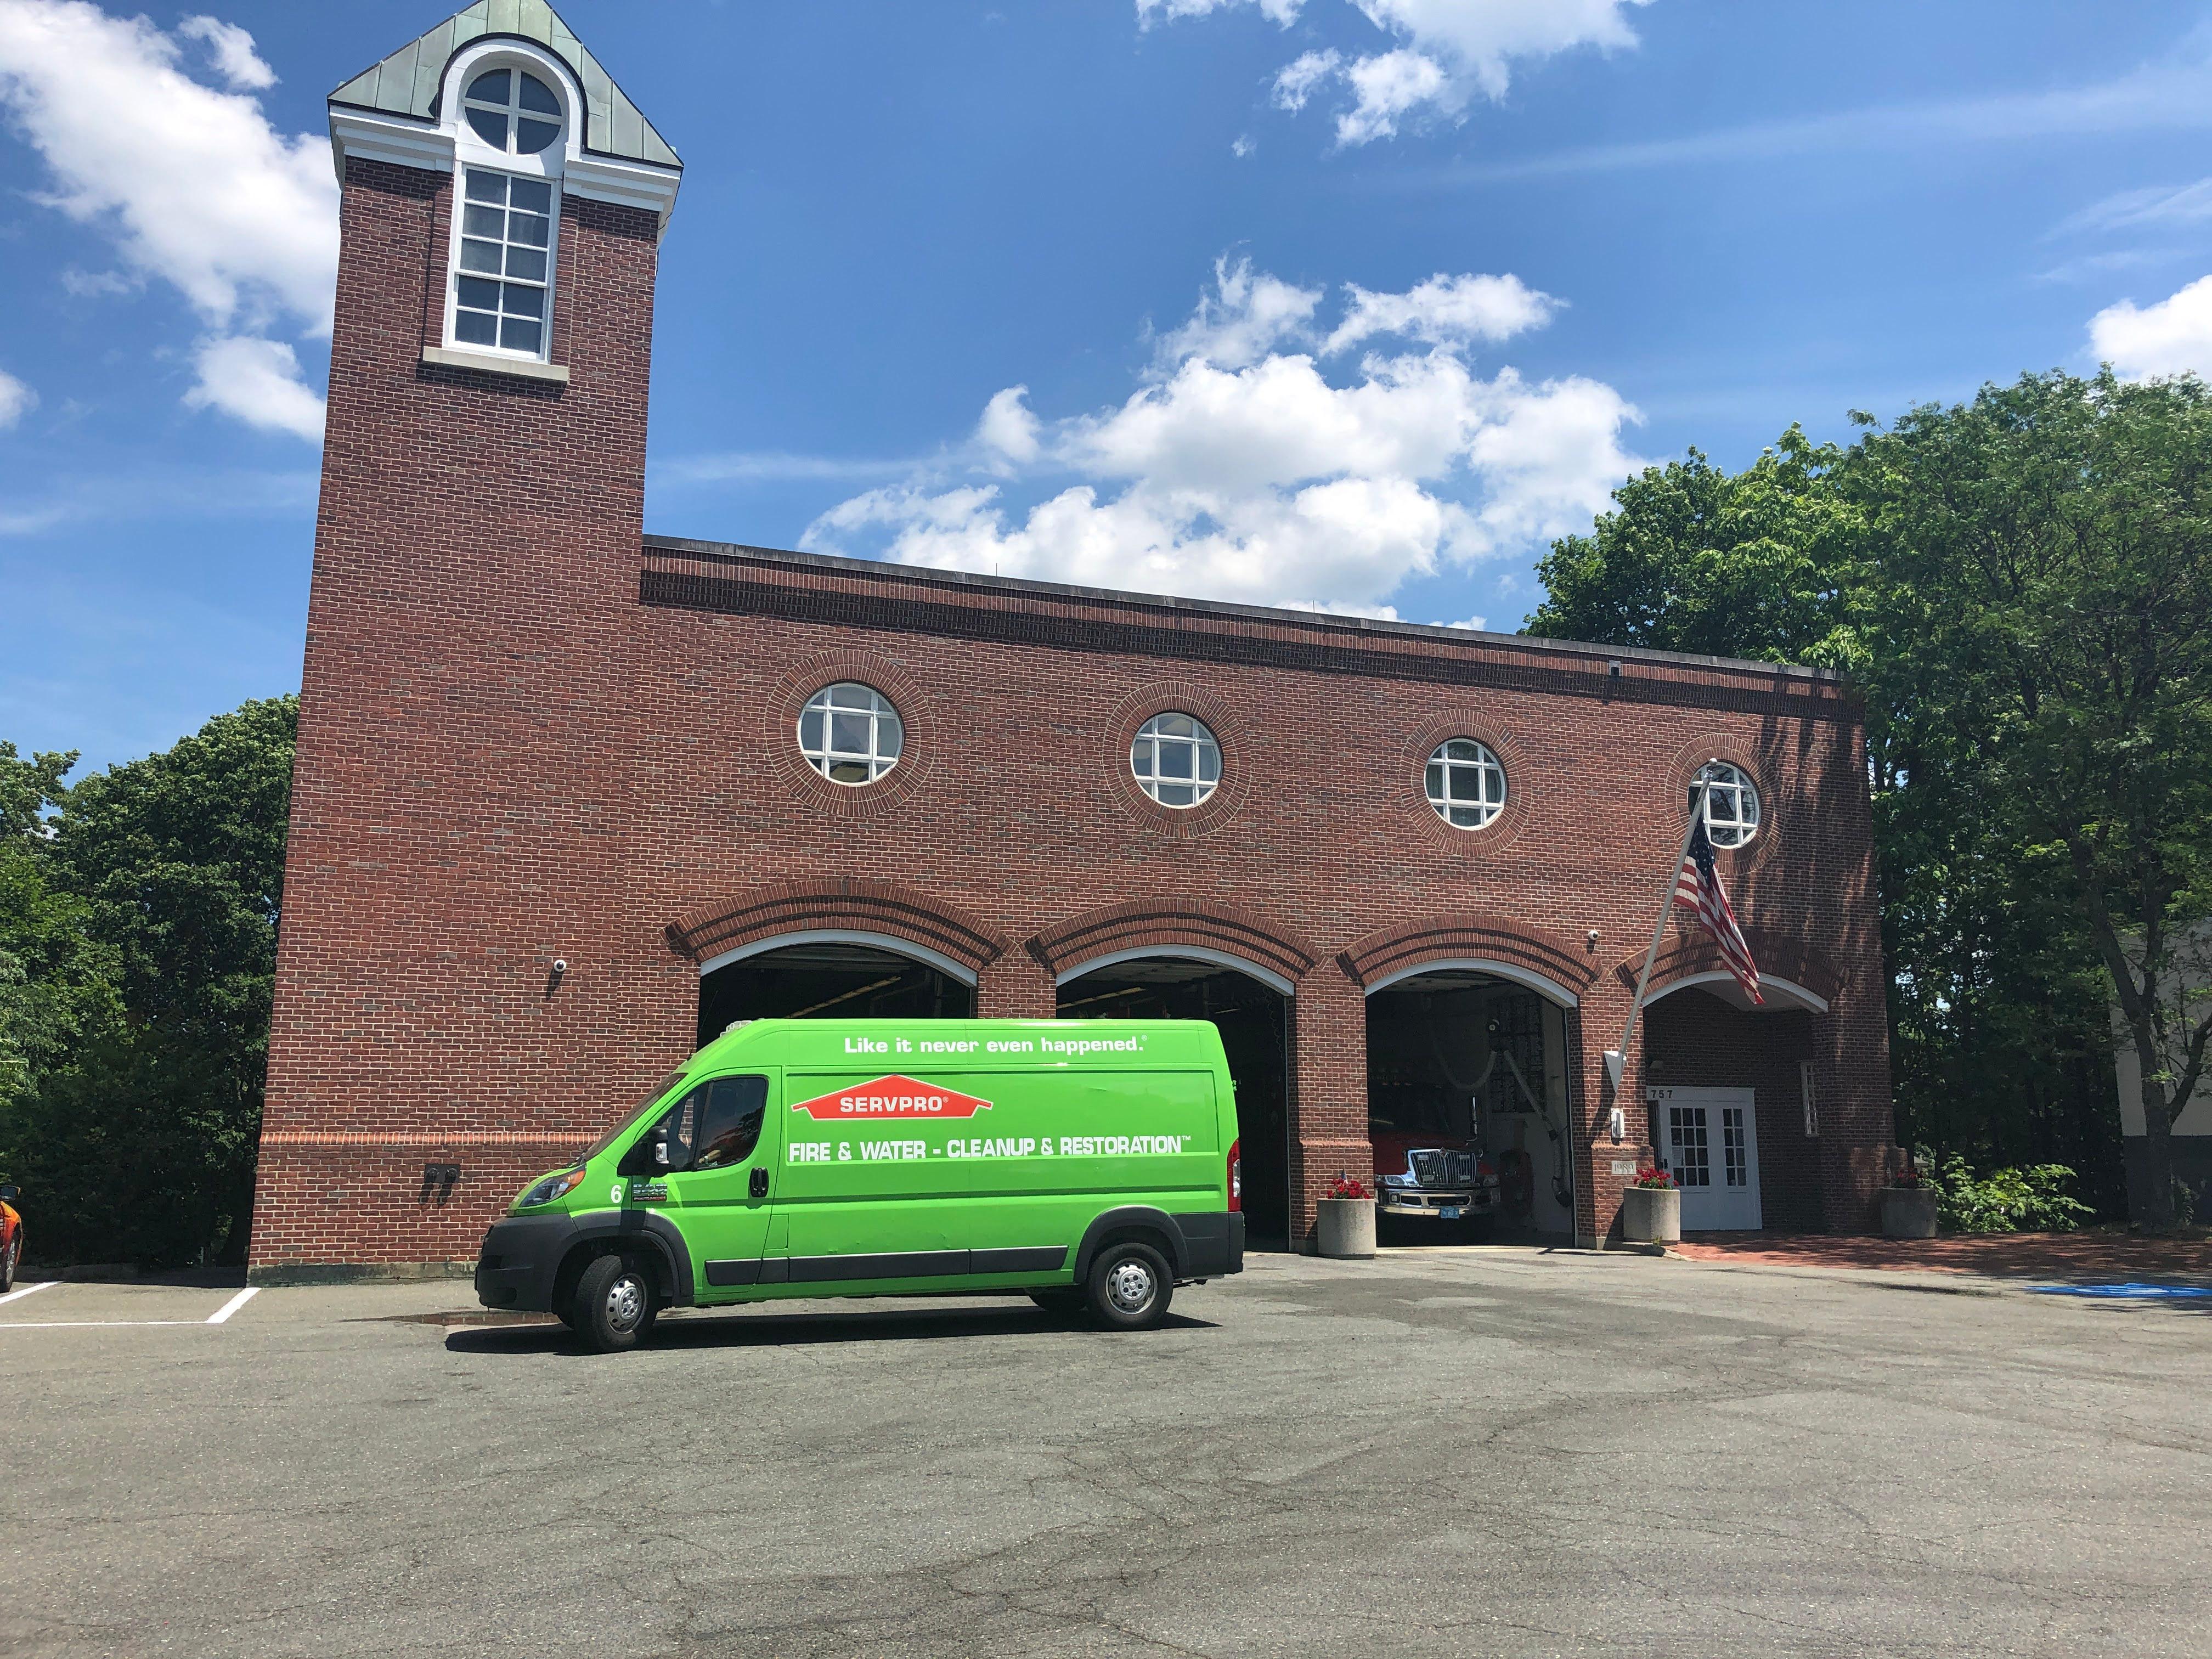 Our iconic green van parked in front of the Reading, MA Fire Department after we donated 24 cases of water to the hard-working men and women who help keep our community safe. We also made identical donations to the fire departments in Stoneham, MA, Wakefield, MA, and North Reading, MA.